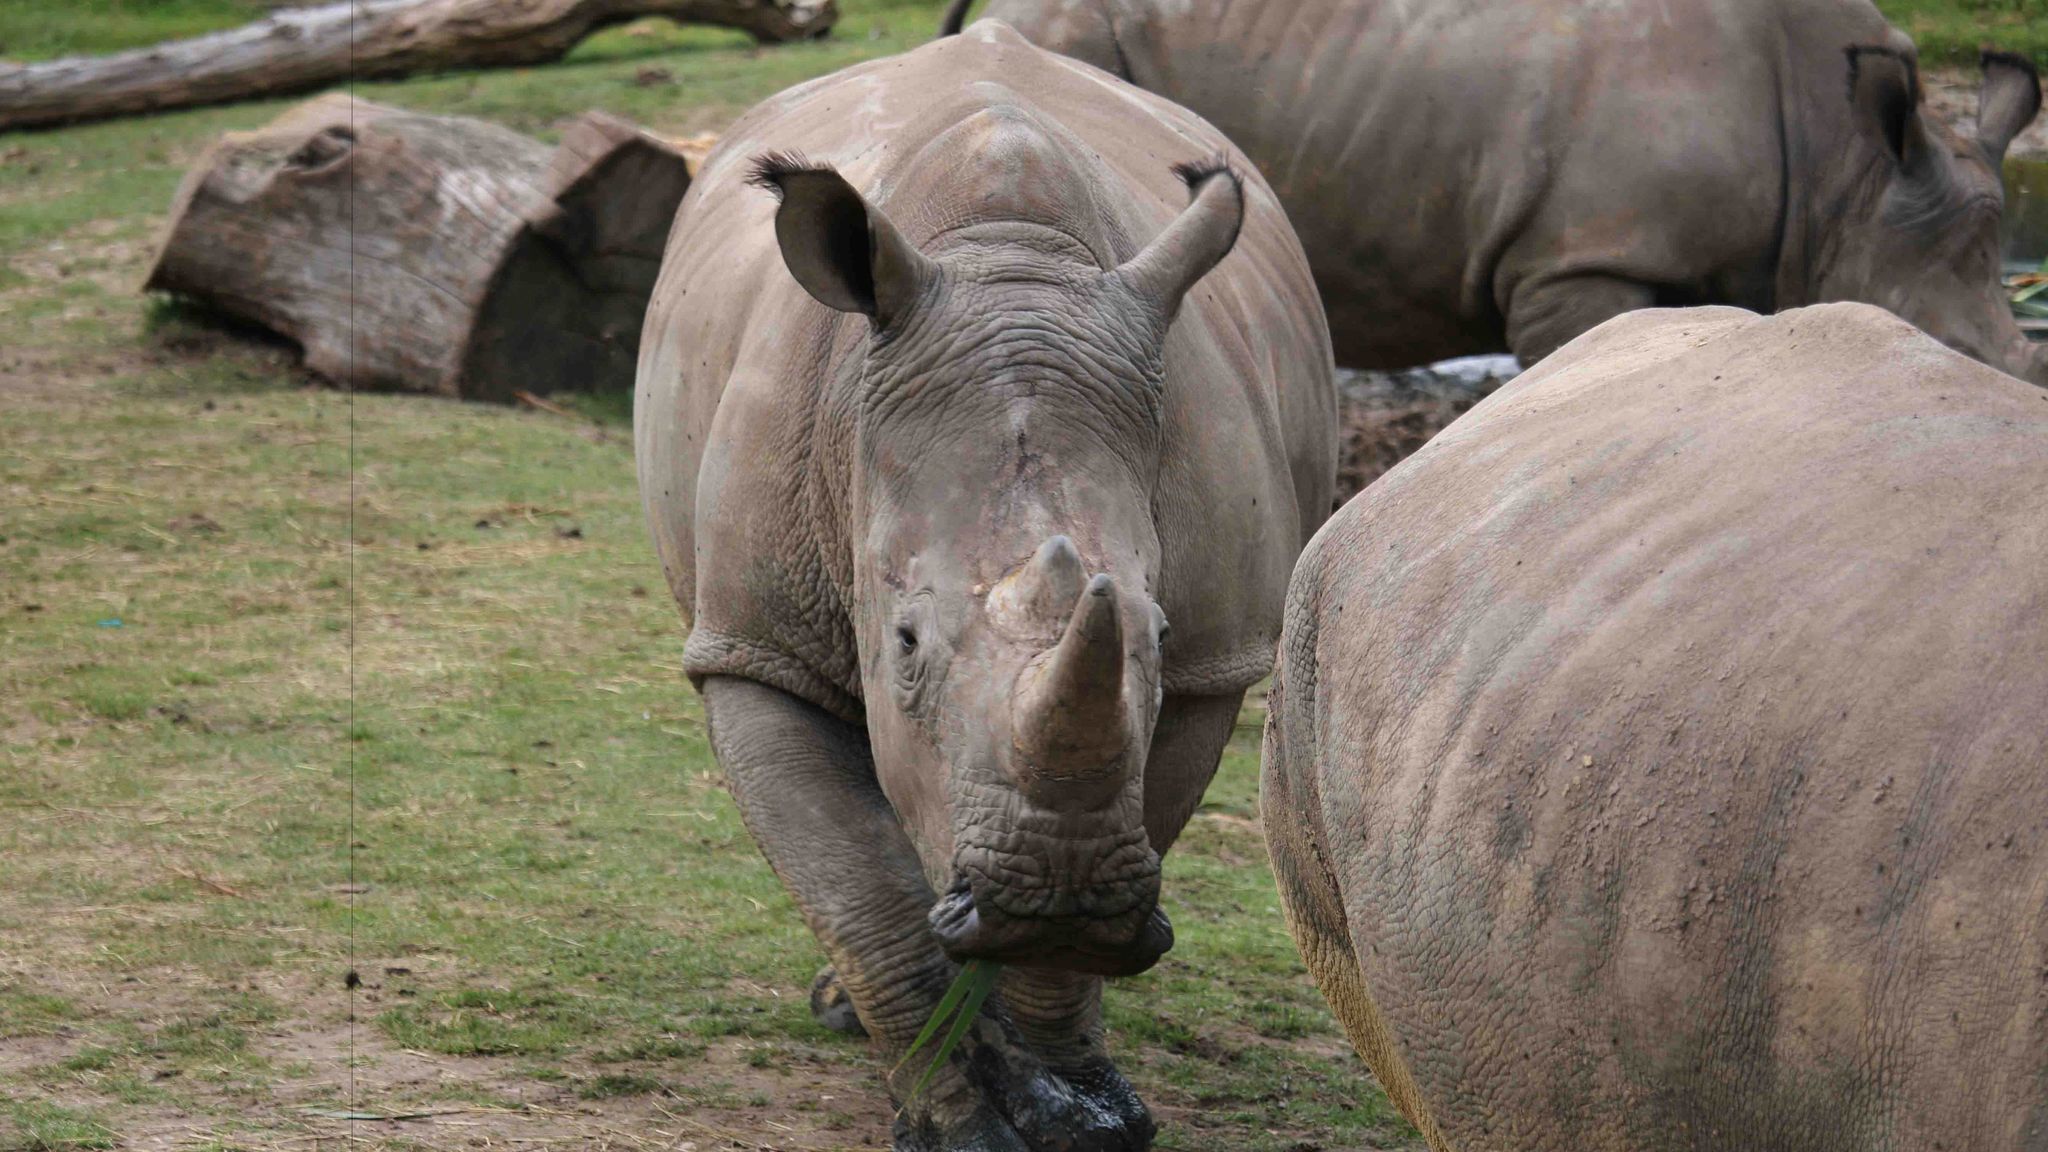 Rhinoceros shot and killed for his horn at French wildlife park